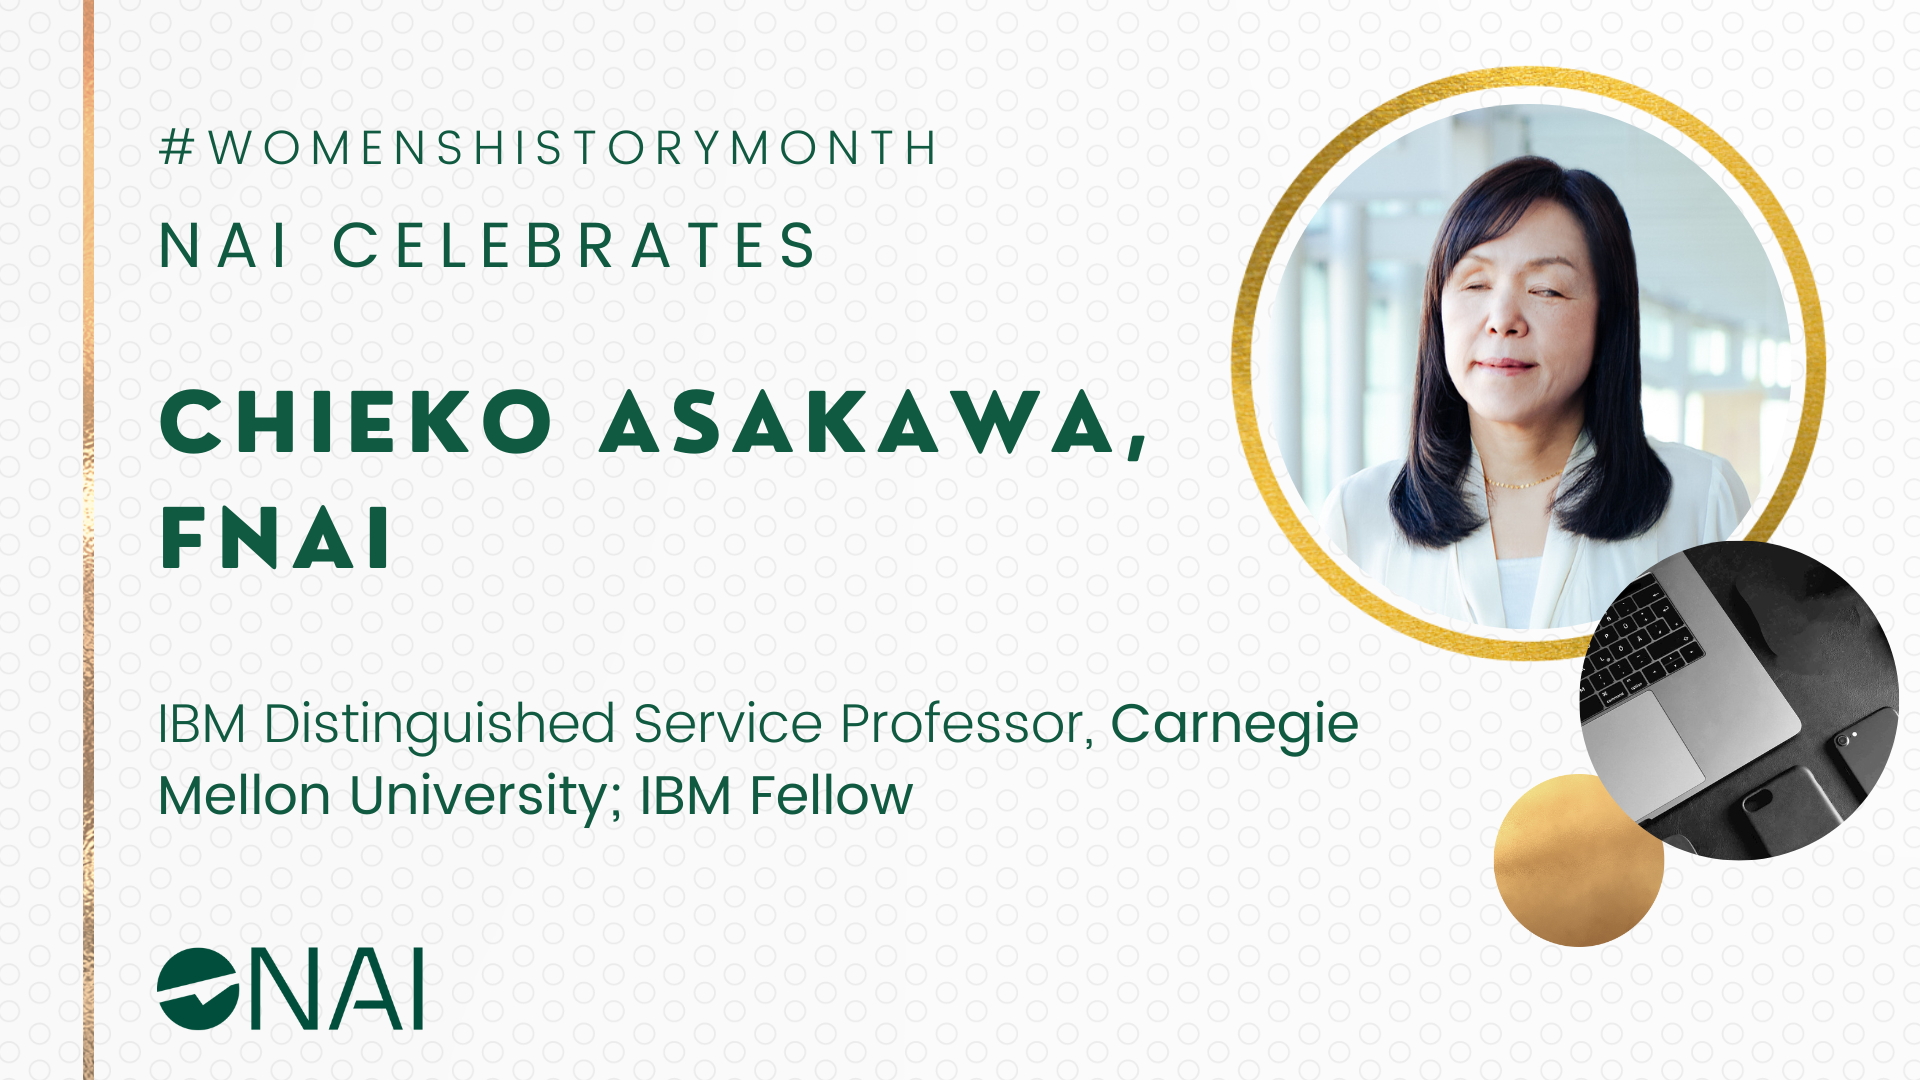 A graphic shows headshot of inventor Chieko Asakawa with the text "#WomensHistoryMonth NAI celebrates Chieko Asakawa, FNAI", followed by "IBM Distinguished Service Professor, Carnegie Mellon University; IBM Fellow". The graphic also includes a small image with a computer, smartphone, and smartphone case.